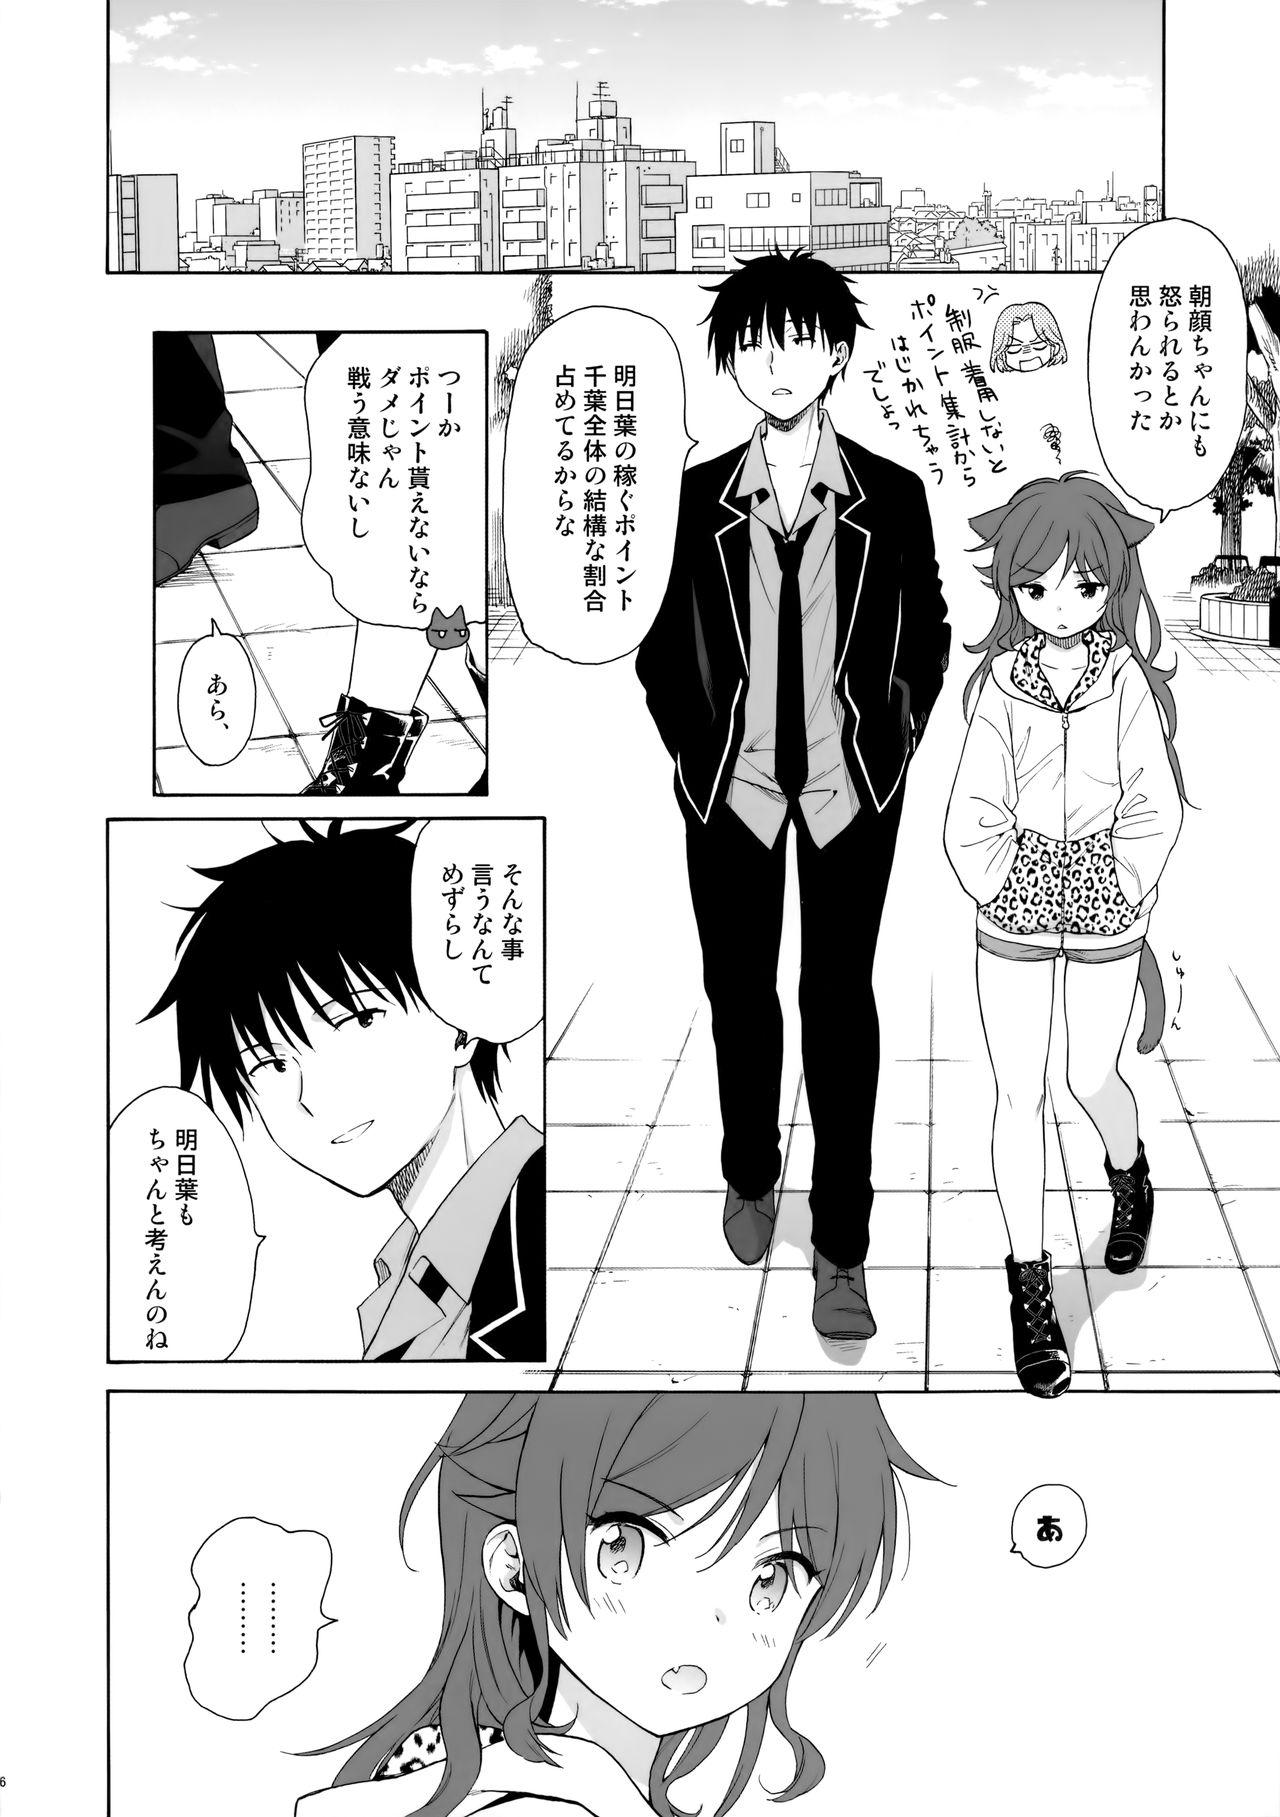 Peeing Imouto Manual - Qualidea code Stepfather - Page 5